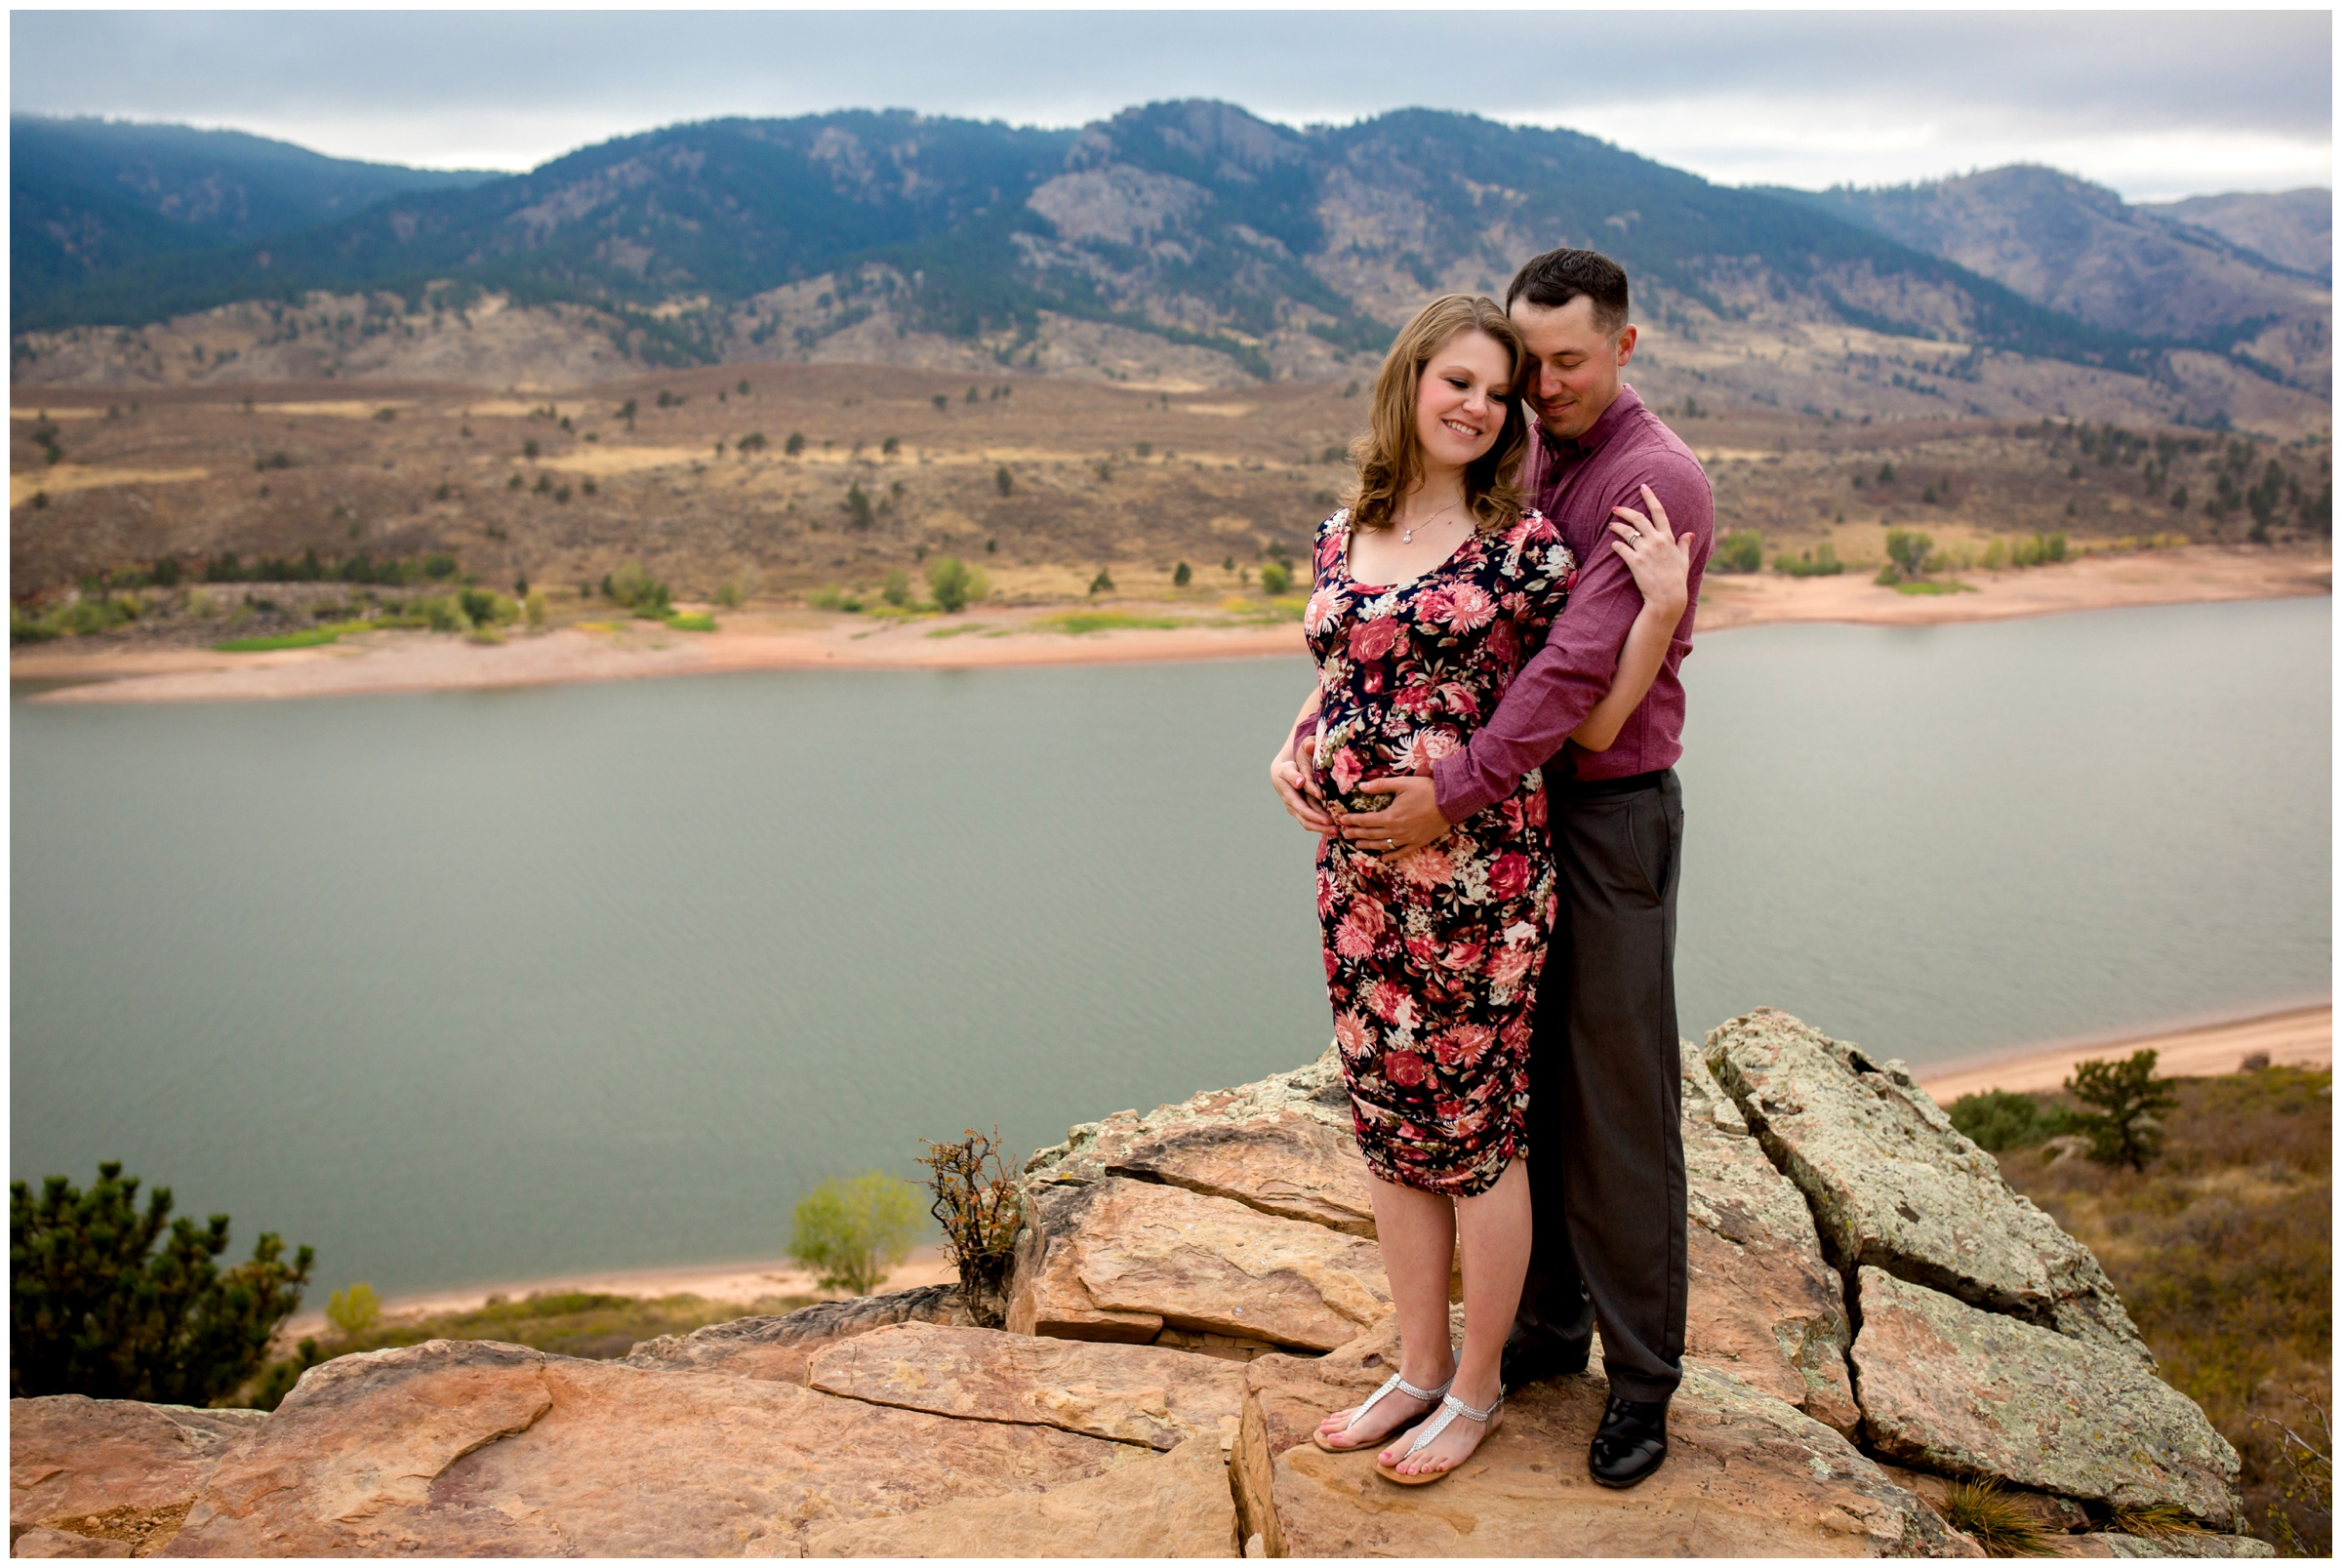 Ft Collins maternity photos at Horsetooth Reservoir by award-winning Colorado photographer Plum Pretty Photography